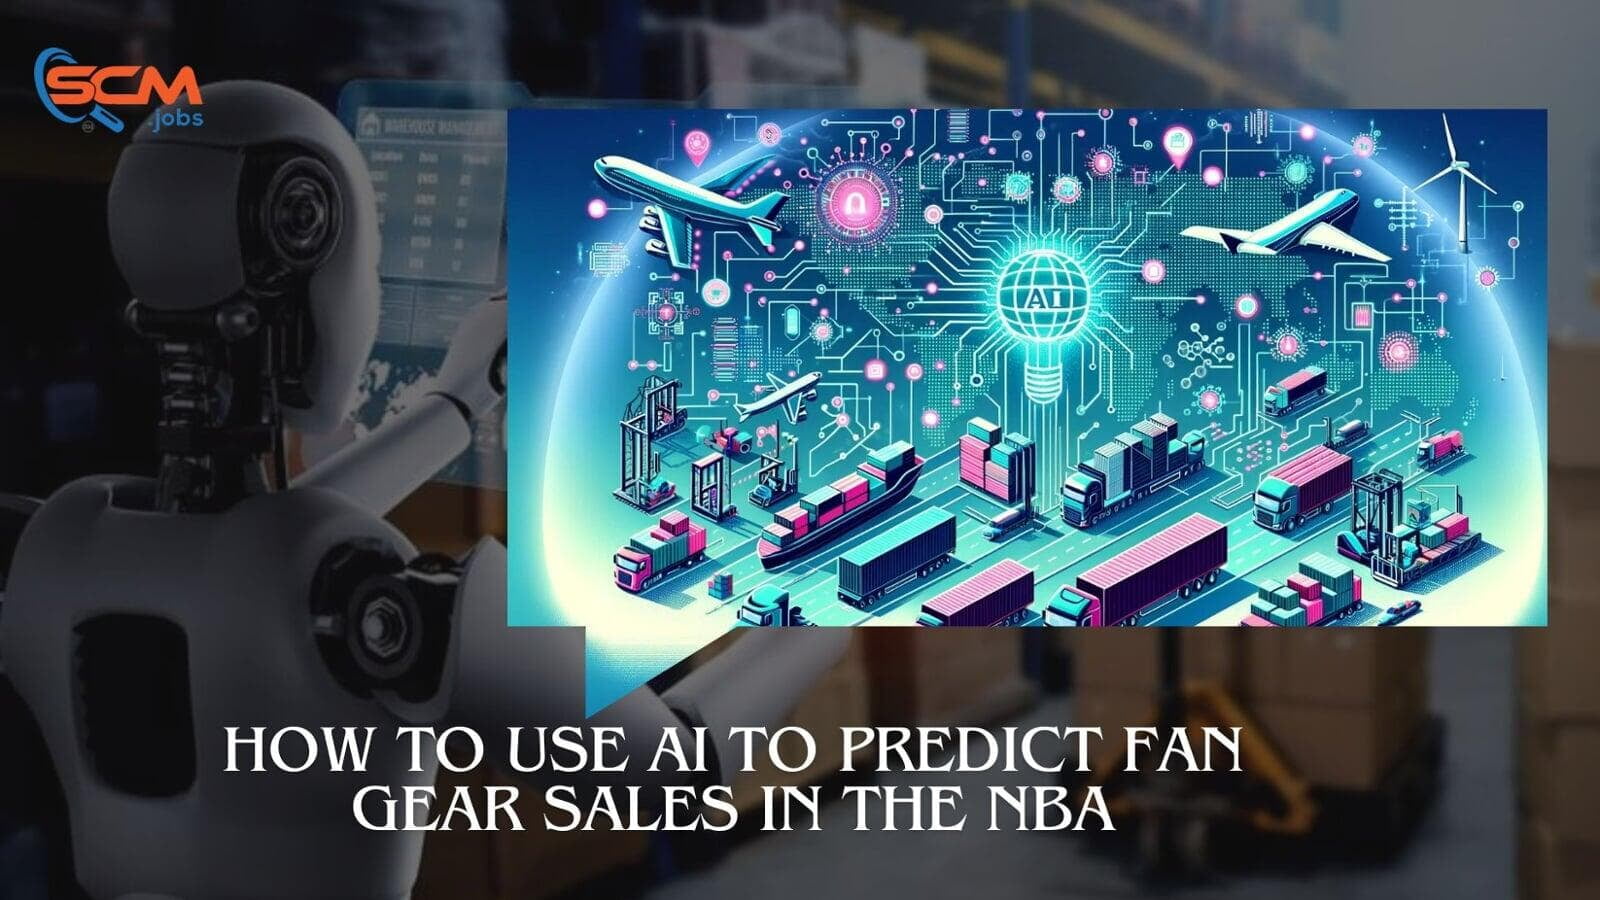 How to Use AI to Predict Fan Gear Sales in the NBA